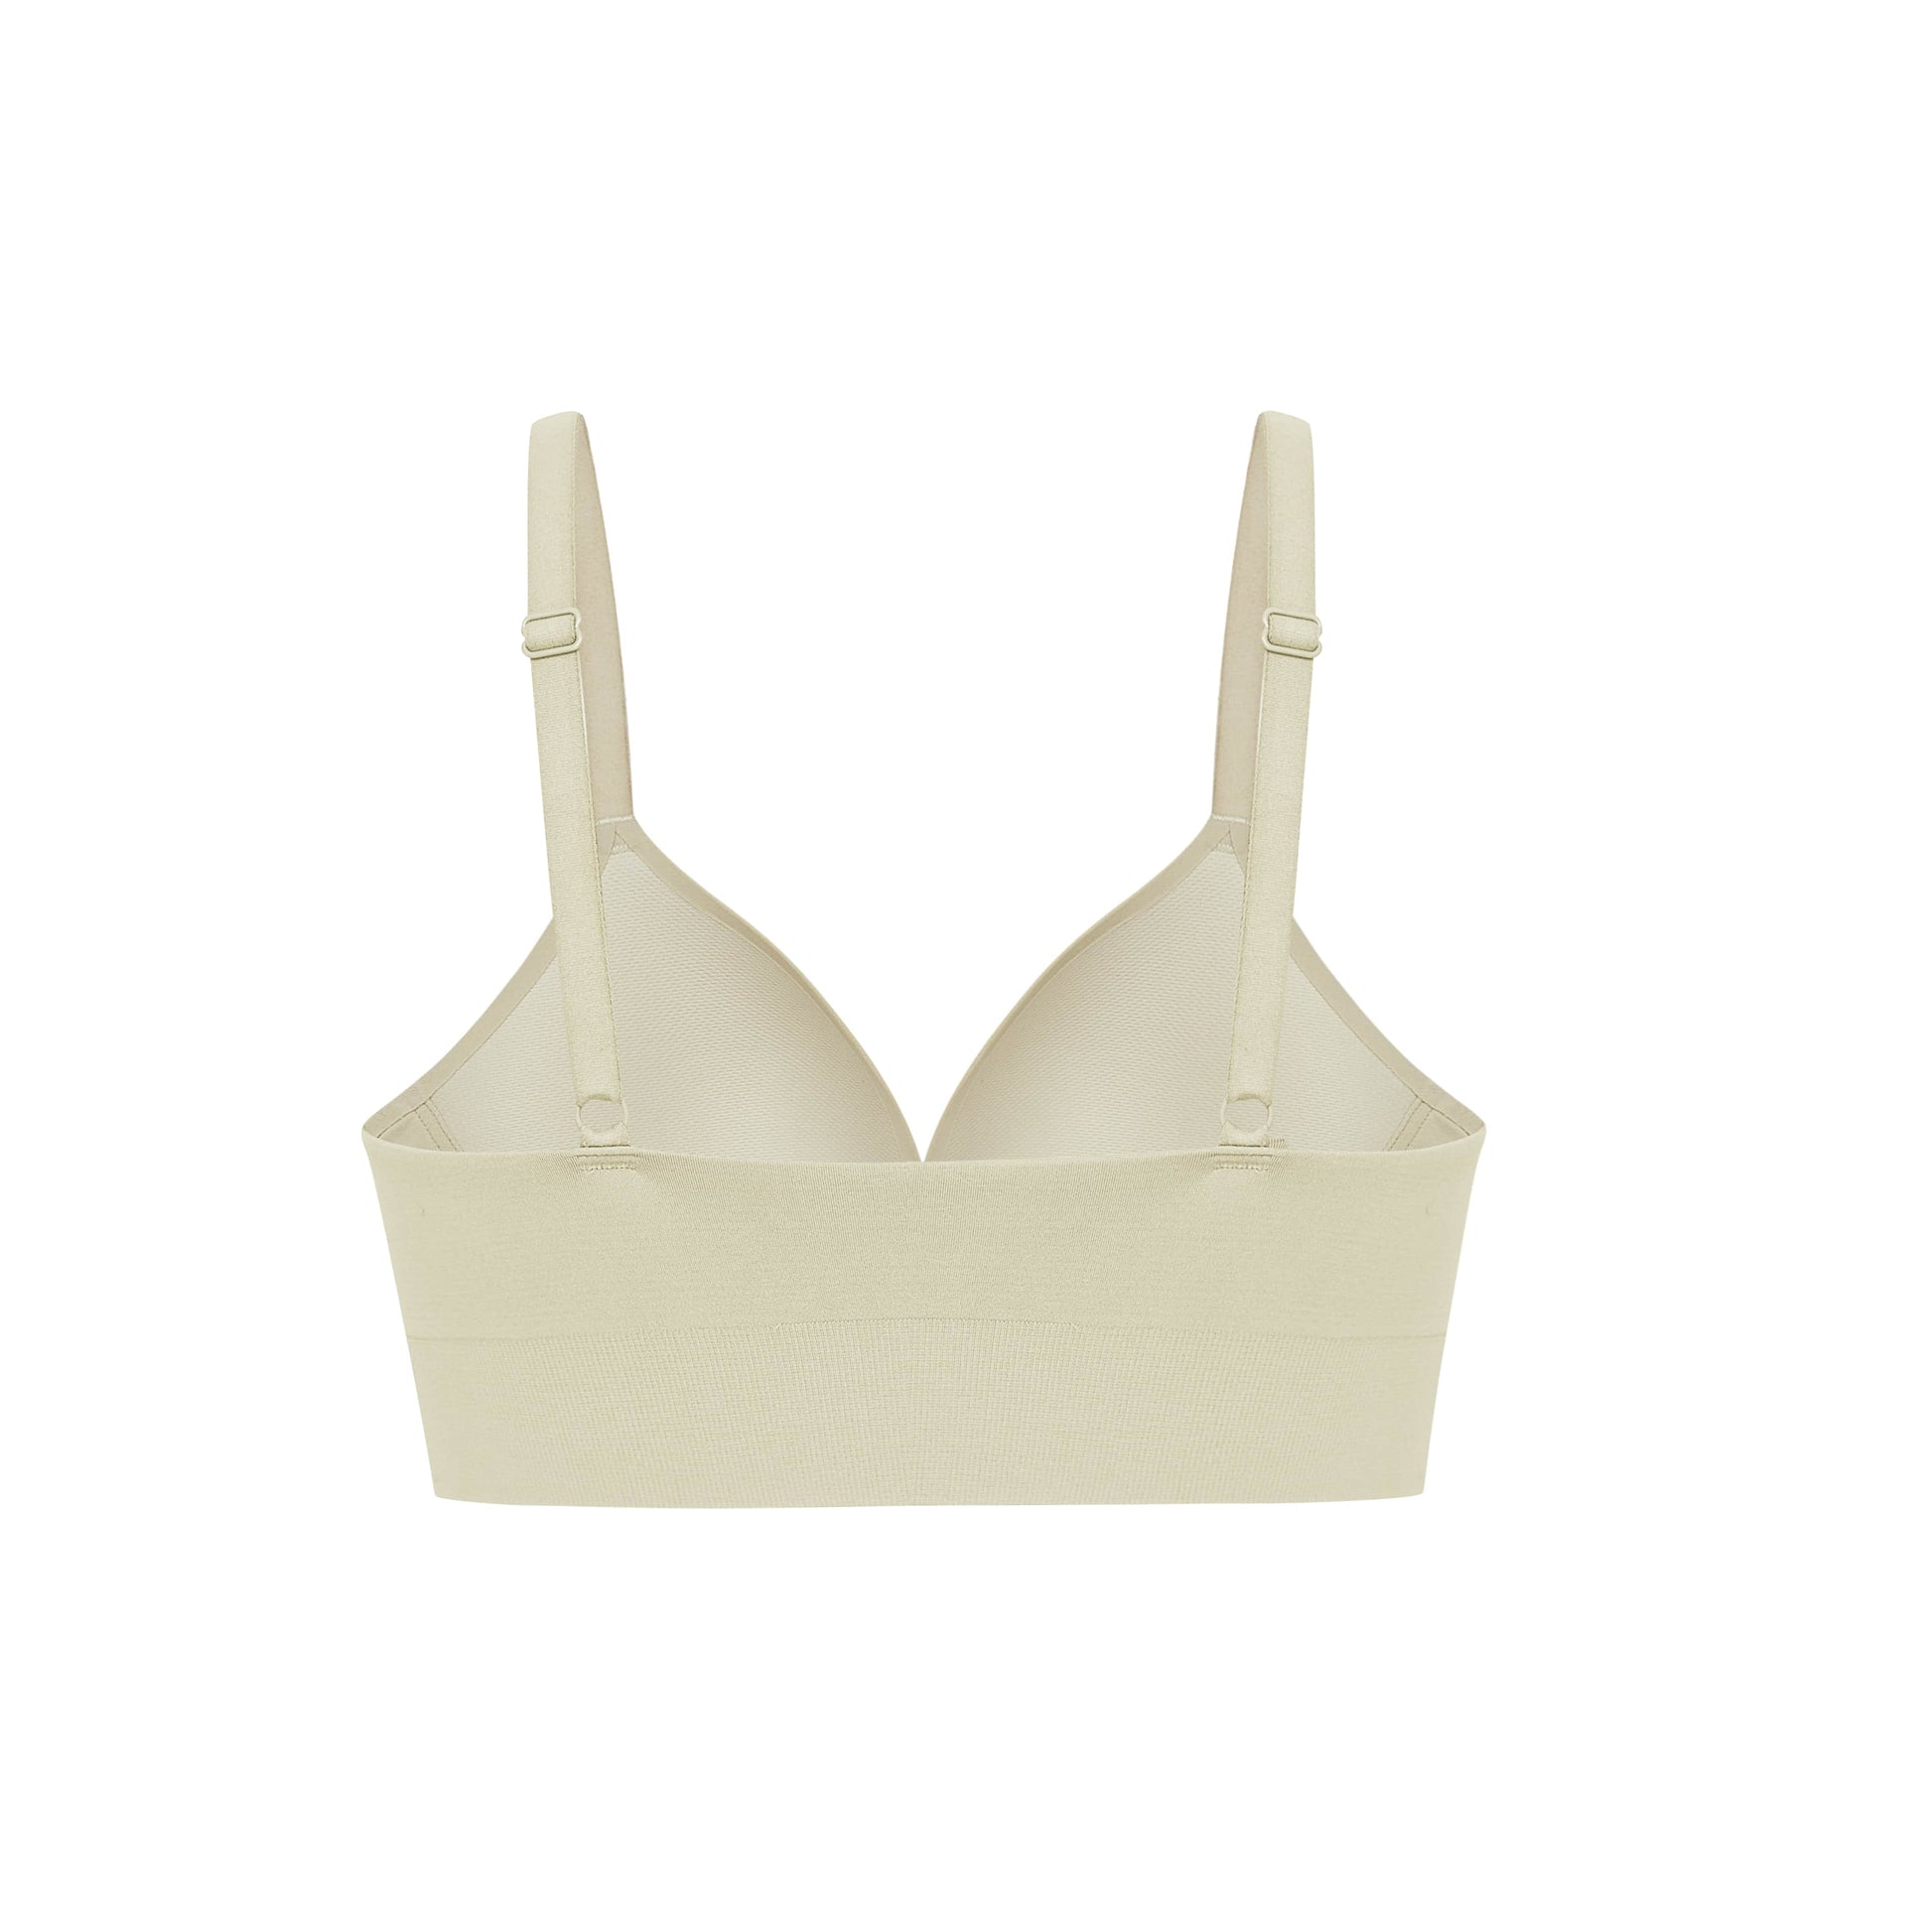 M&S WHITE COTTON SMOOTH FULL CUP SMOOTHING UNDERWIRE BRA SIZE 38B